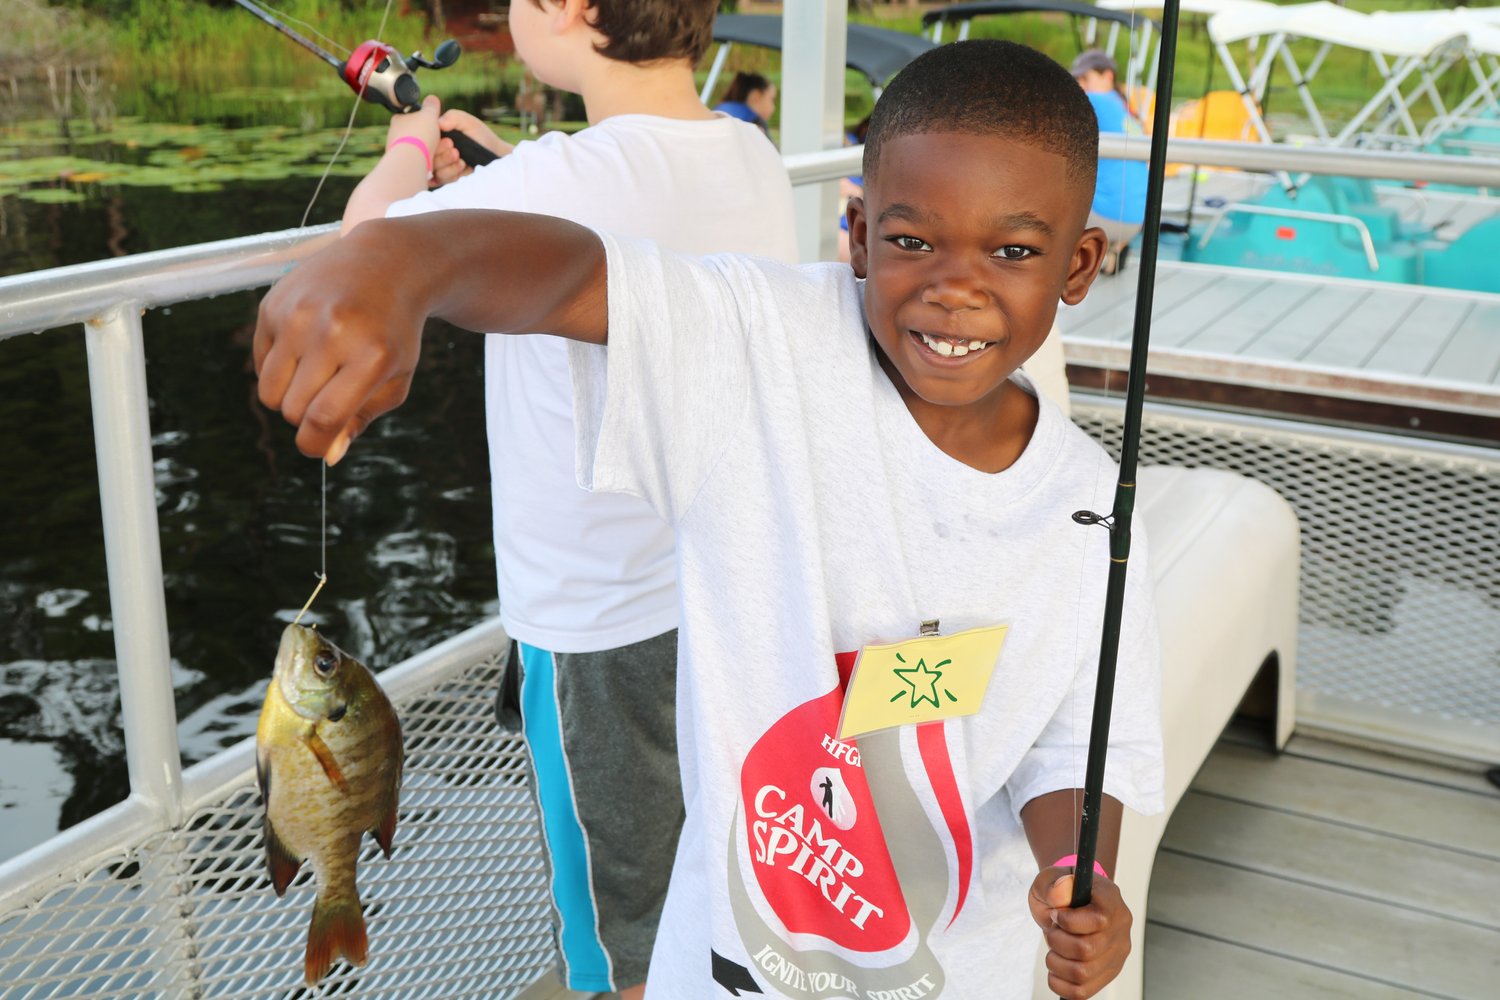 Have Questions About Camp? We've Got Answers! — Camp Boggy Creek